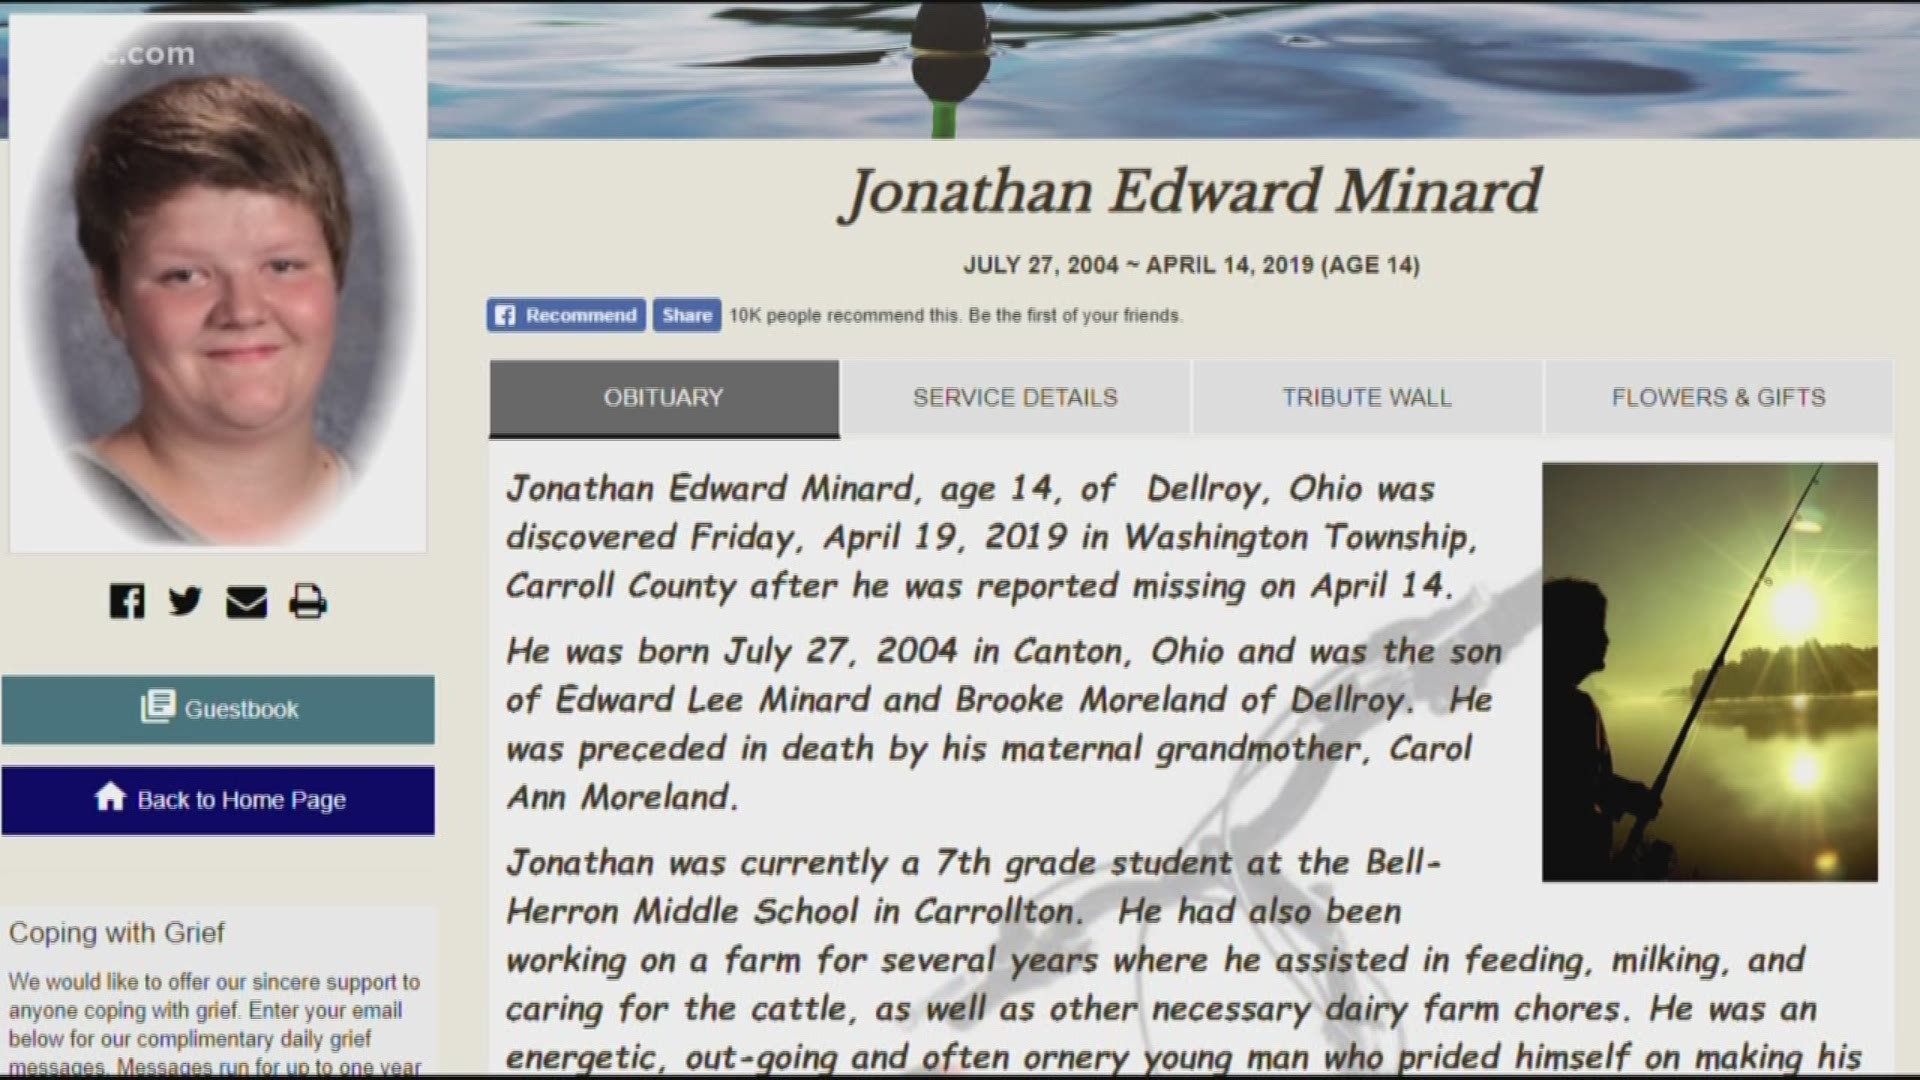 Family, Friends of Minard remembered his life